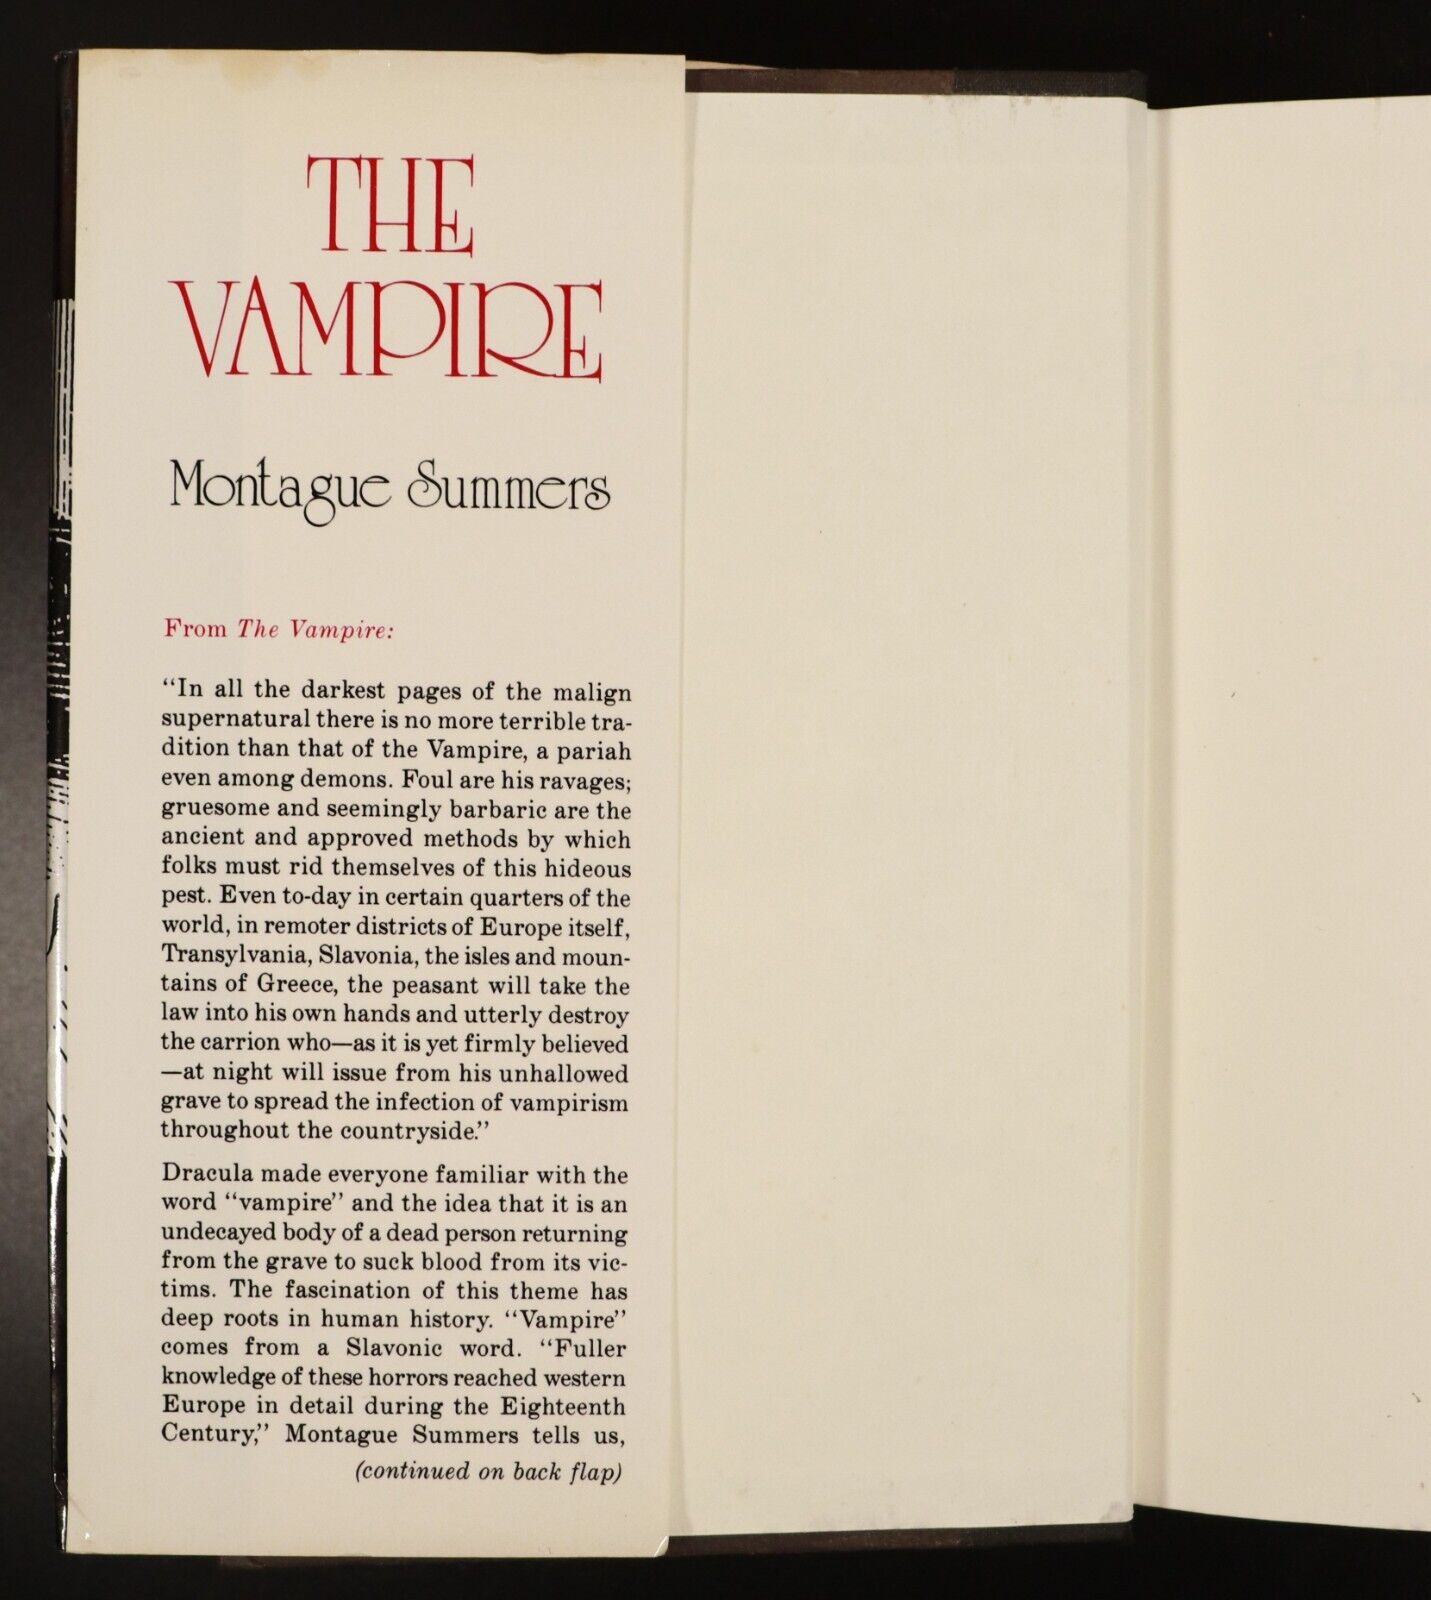 1991 The Vampire by Montague Summers Occult History & Reference Book Vampires